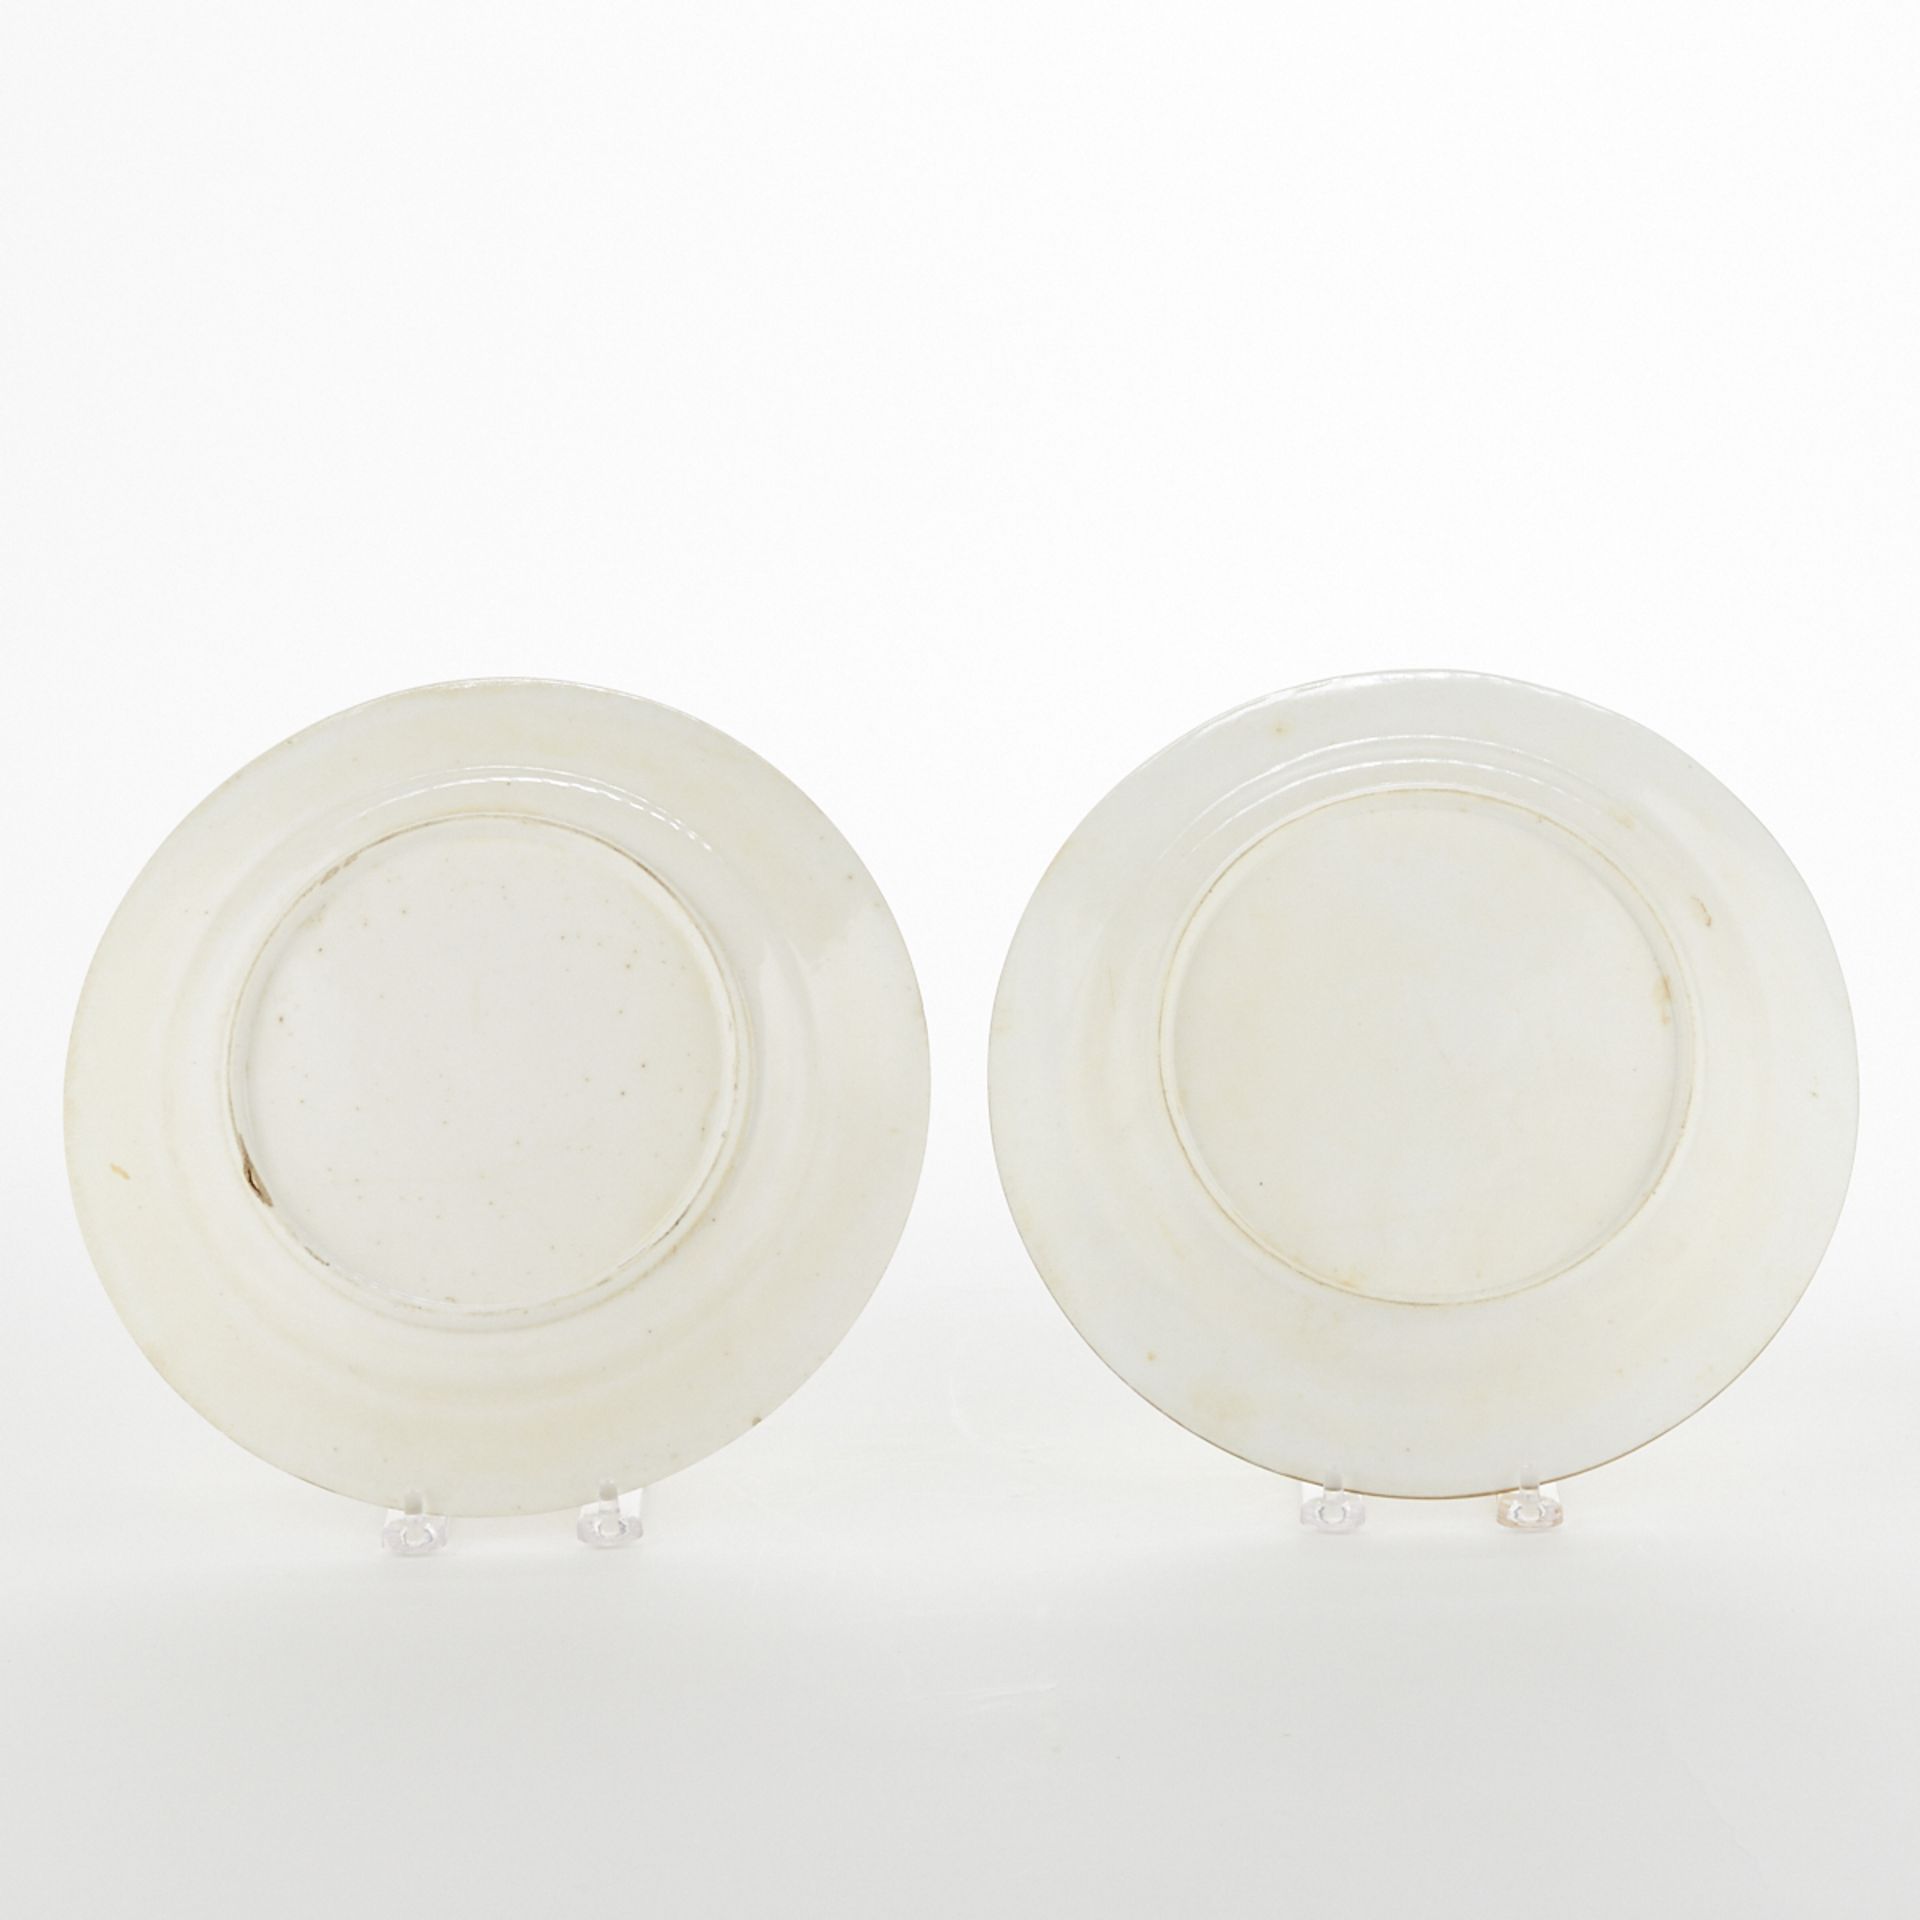 Pair of Chinoiserie Plates - Image 3 of 4